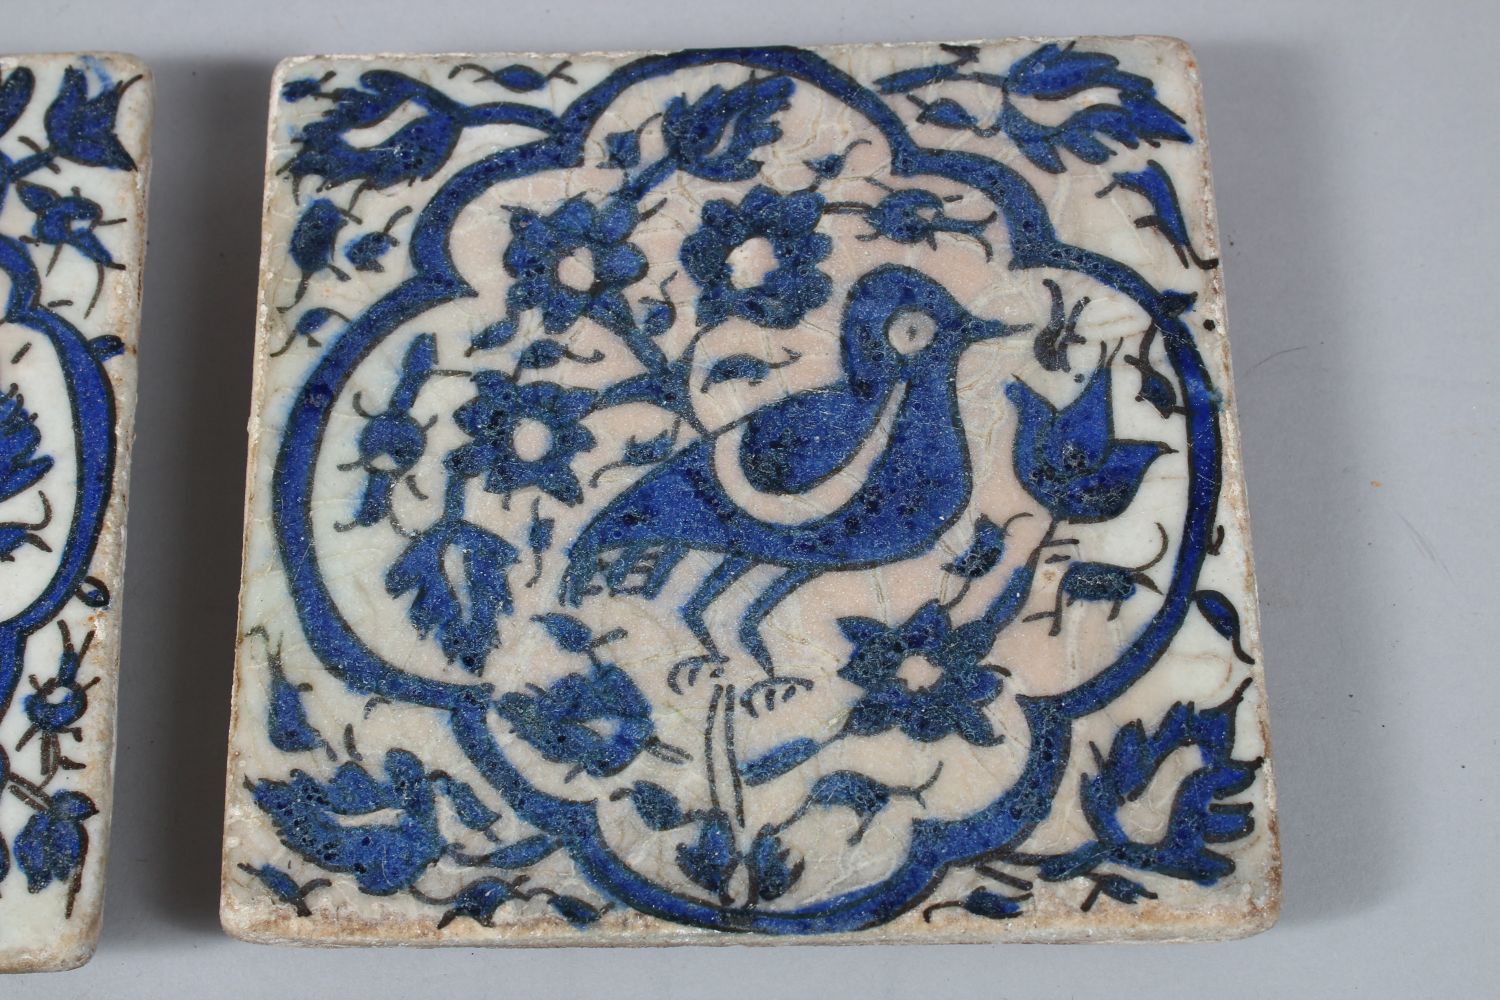 THREE 18TH/19TH CENTURY PERSIAN TILES, each decorated with birds amongst foliage, 15.5cm x 15.5cm - Image 3 of 5